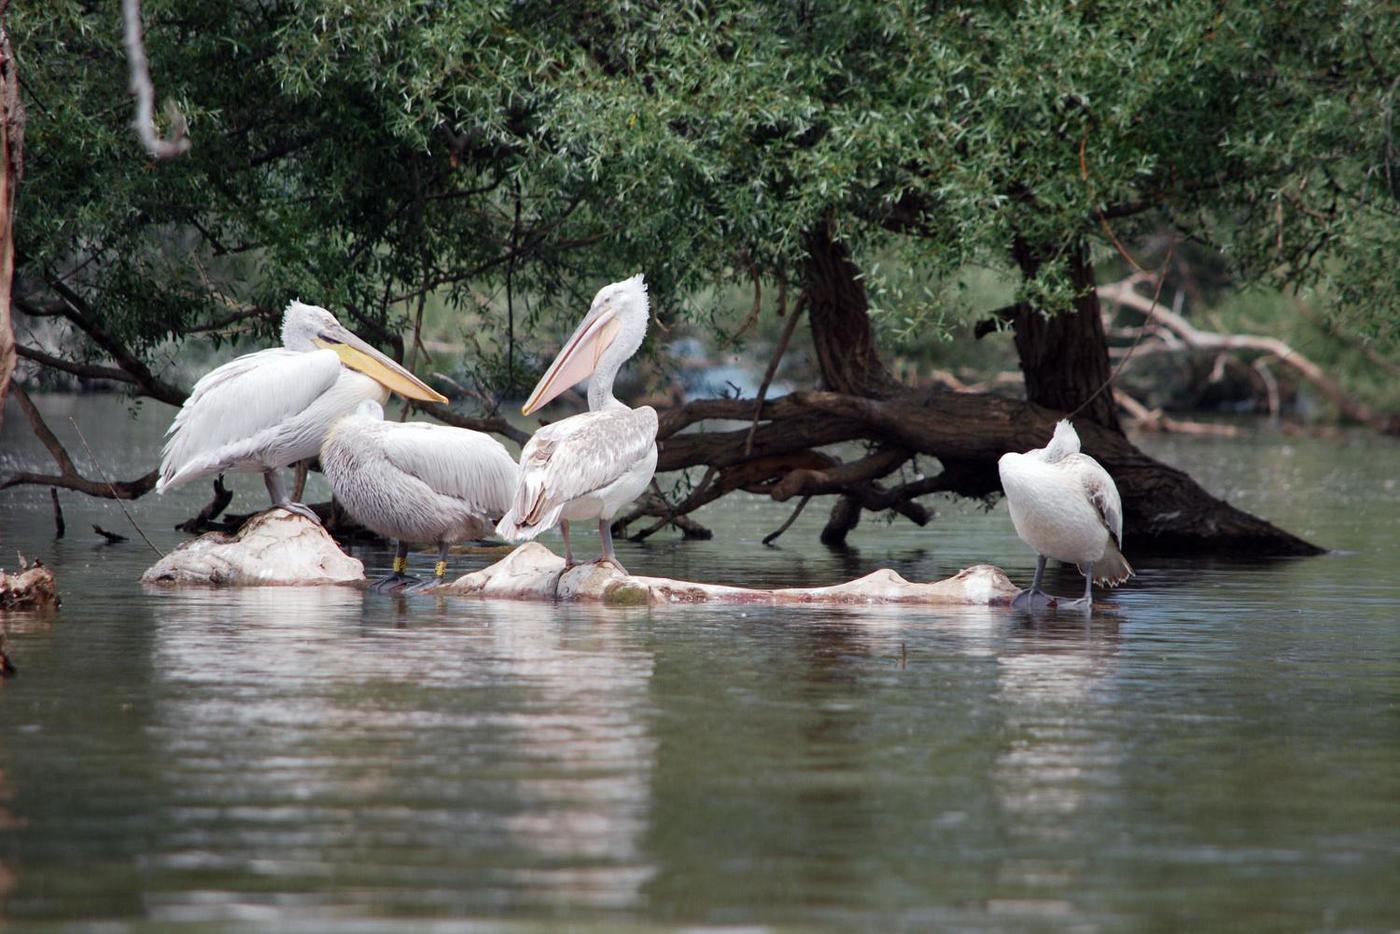 Dalmatian Pelicans are resting on the water